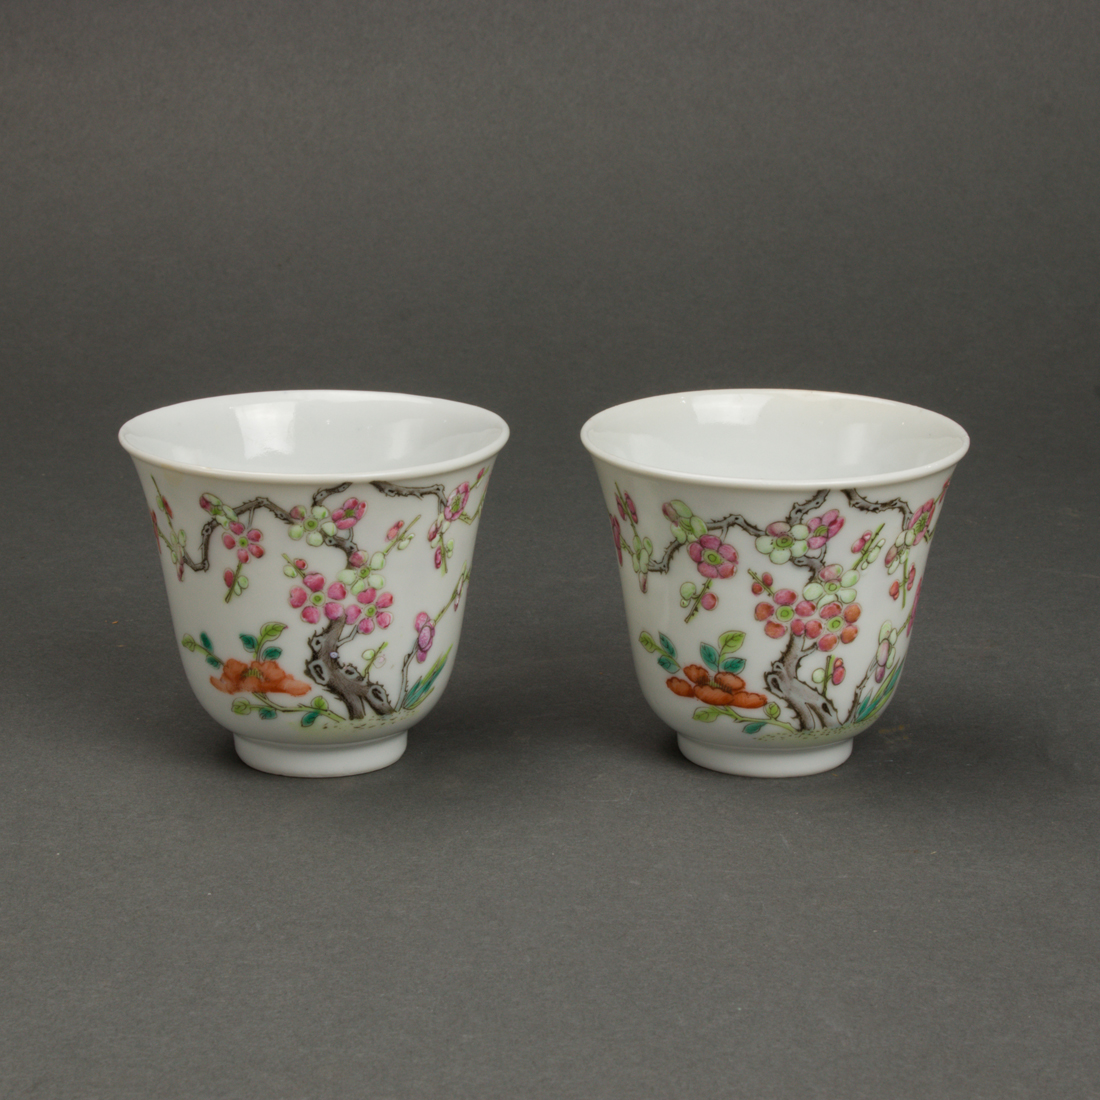 PAIR OF CHINESE FAMILLE ROSE CUPS 2d2a0f